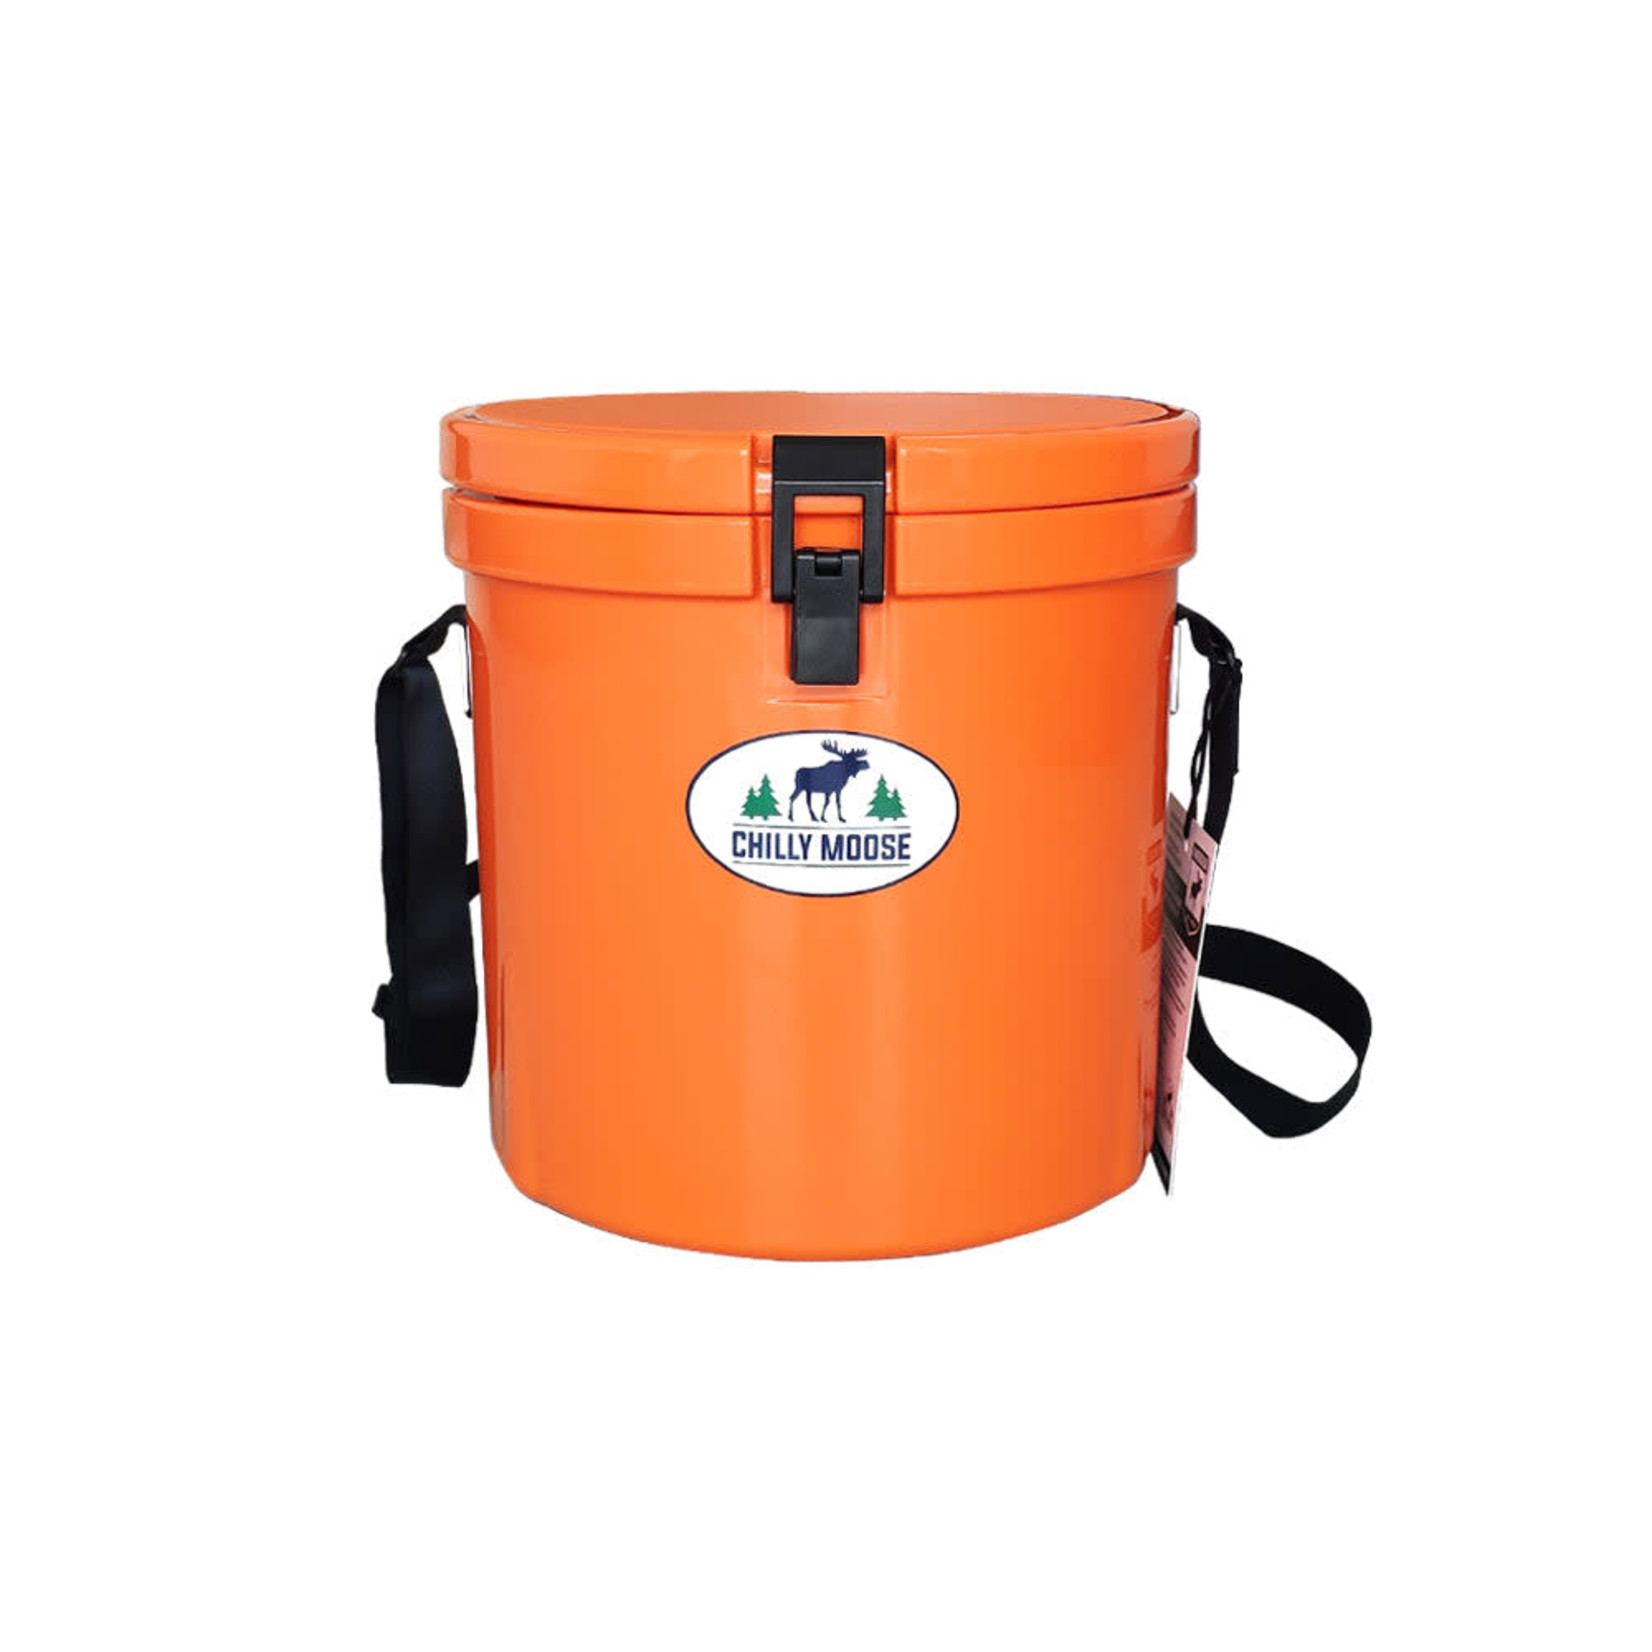 Chilly Moose 12 L Harbour Bucket Coolers